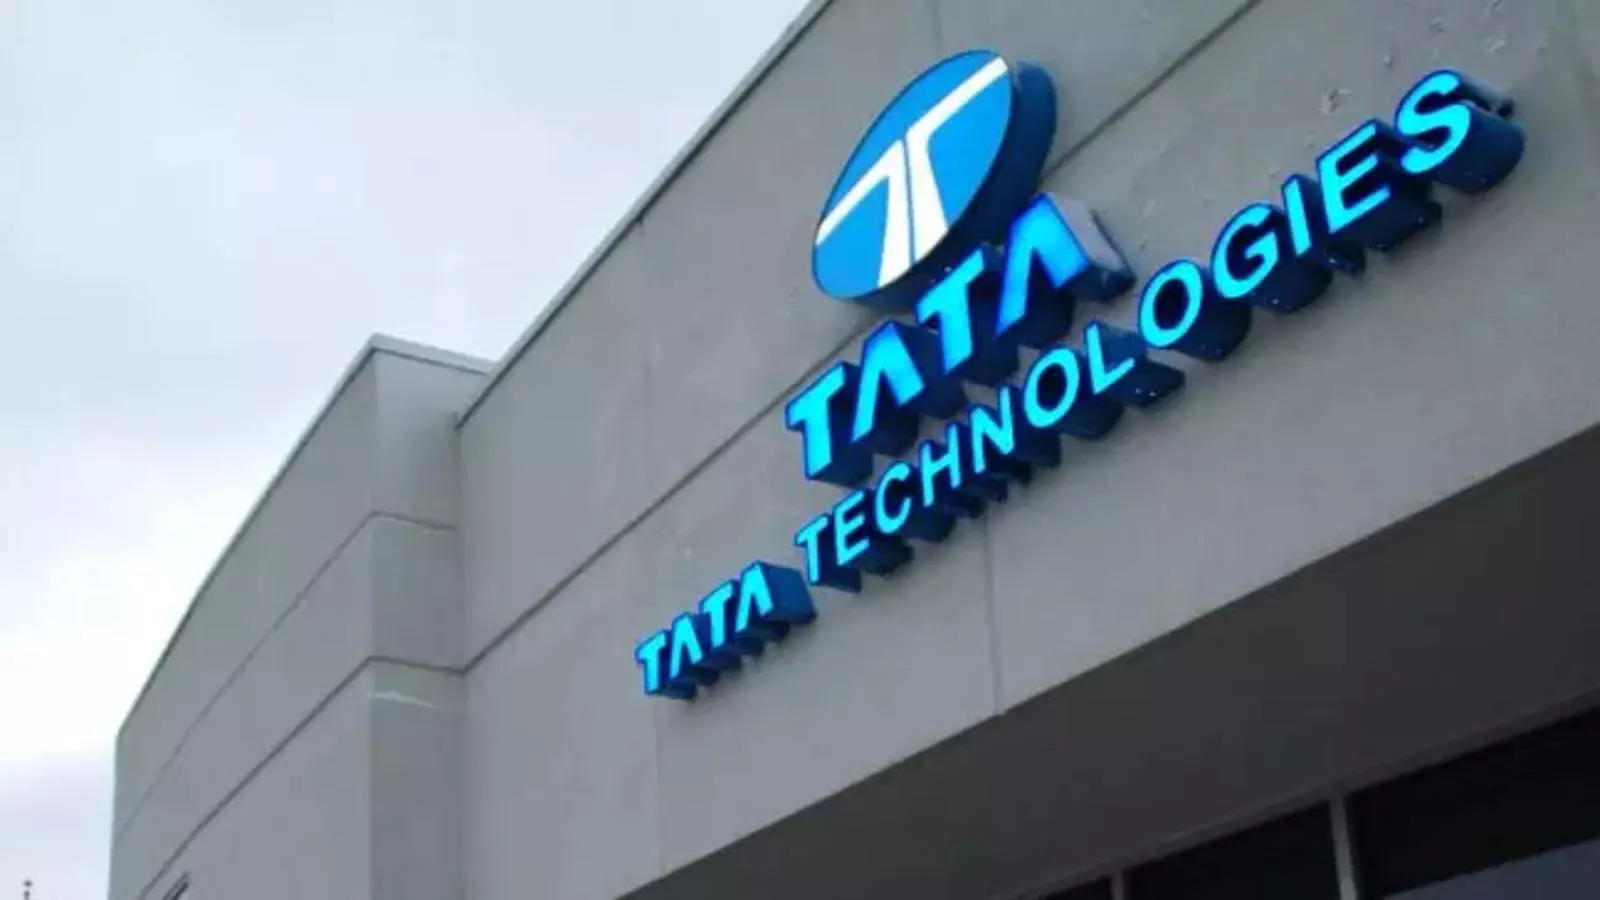 Tata Technologies Q1 Results: Cons PAT drops 15% YoY to Rs 162 crore 